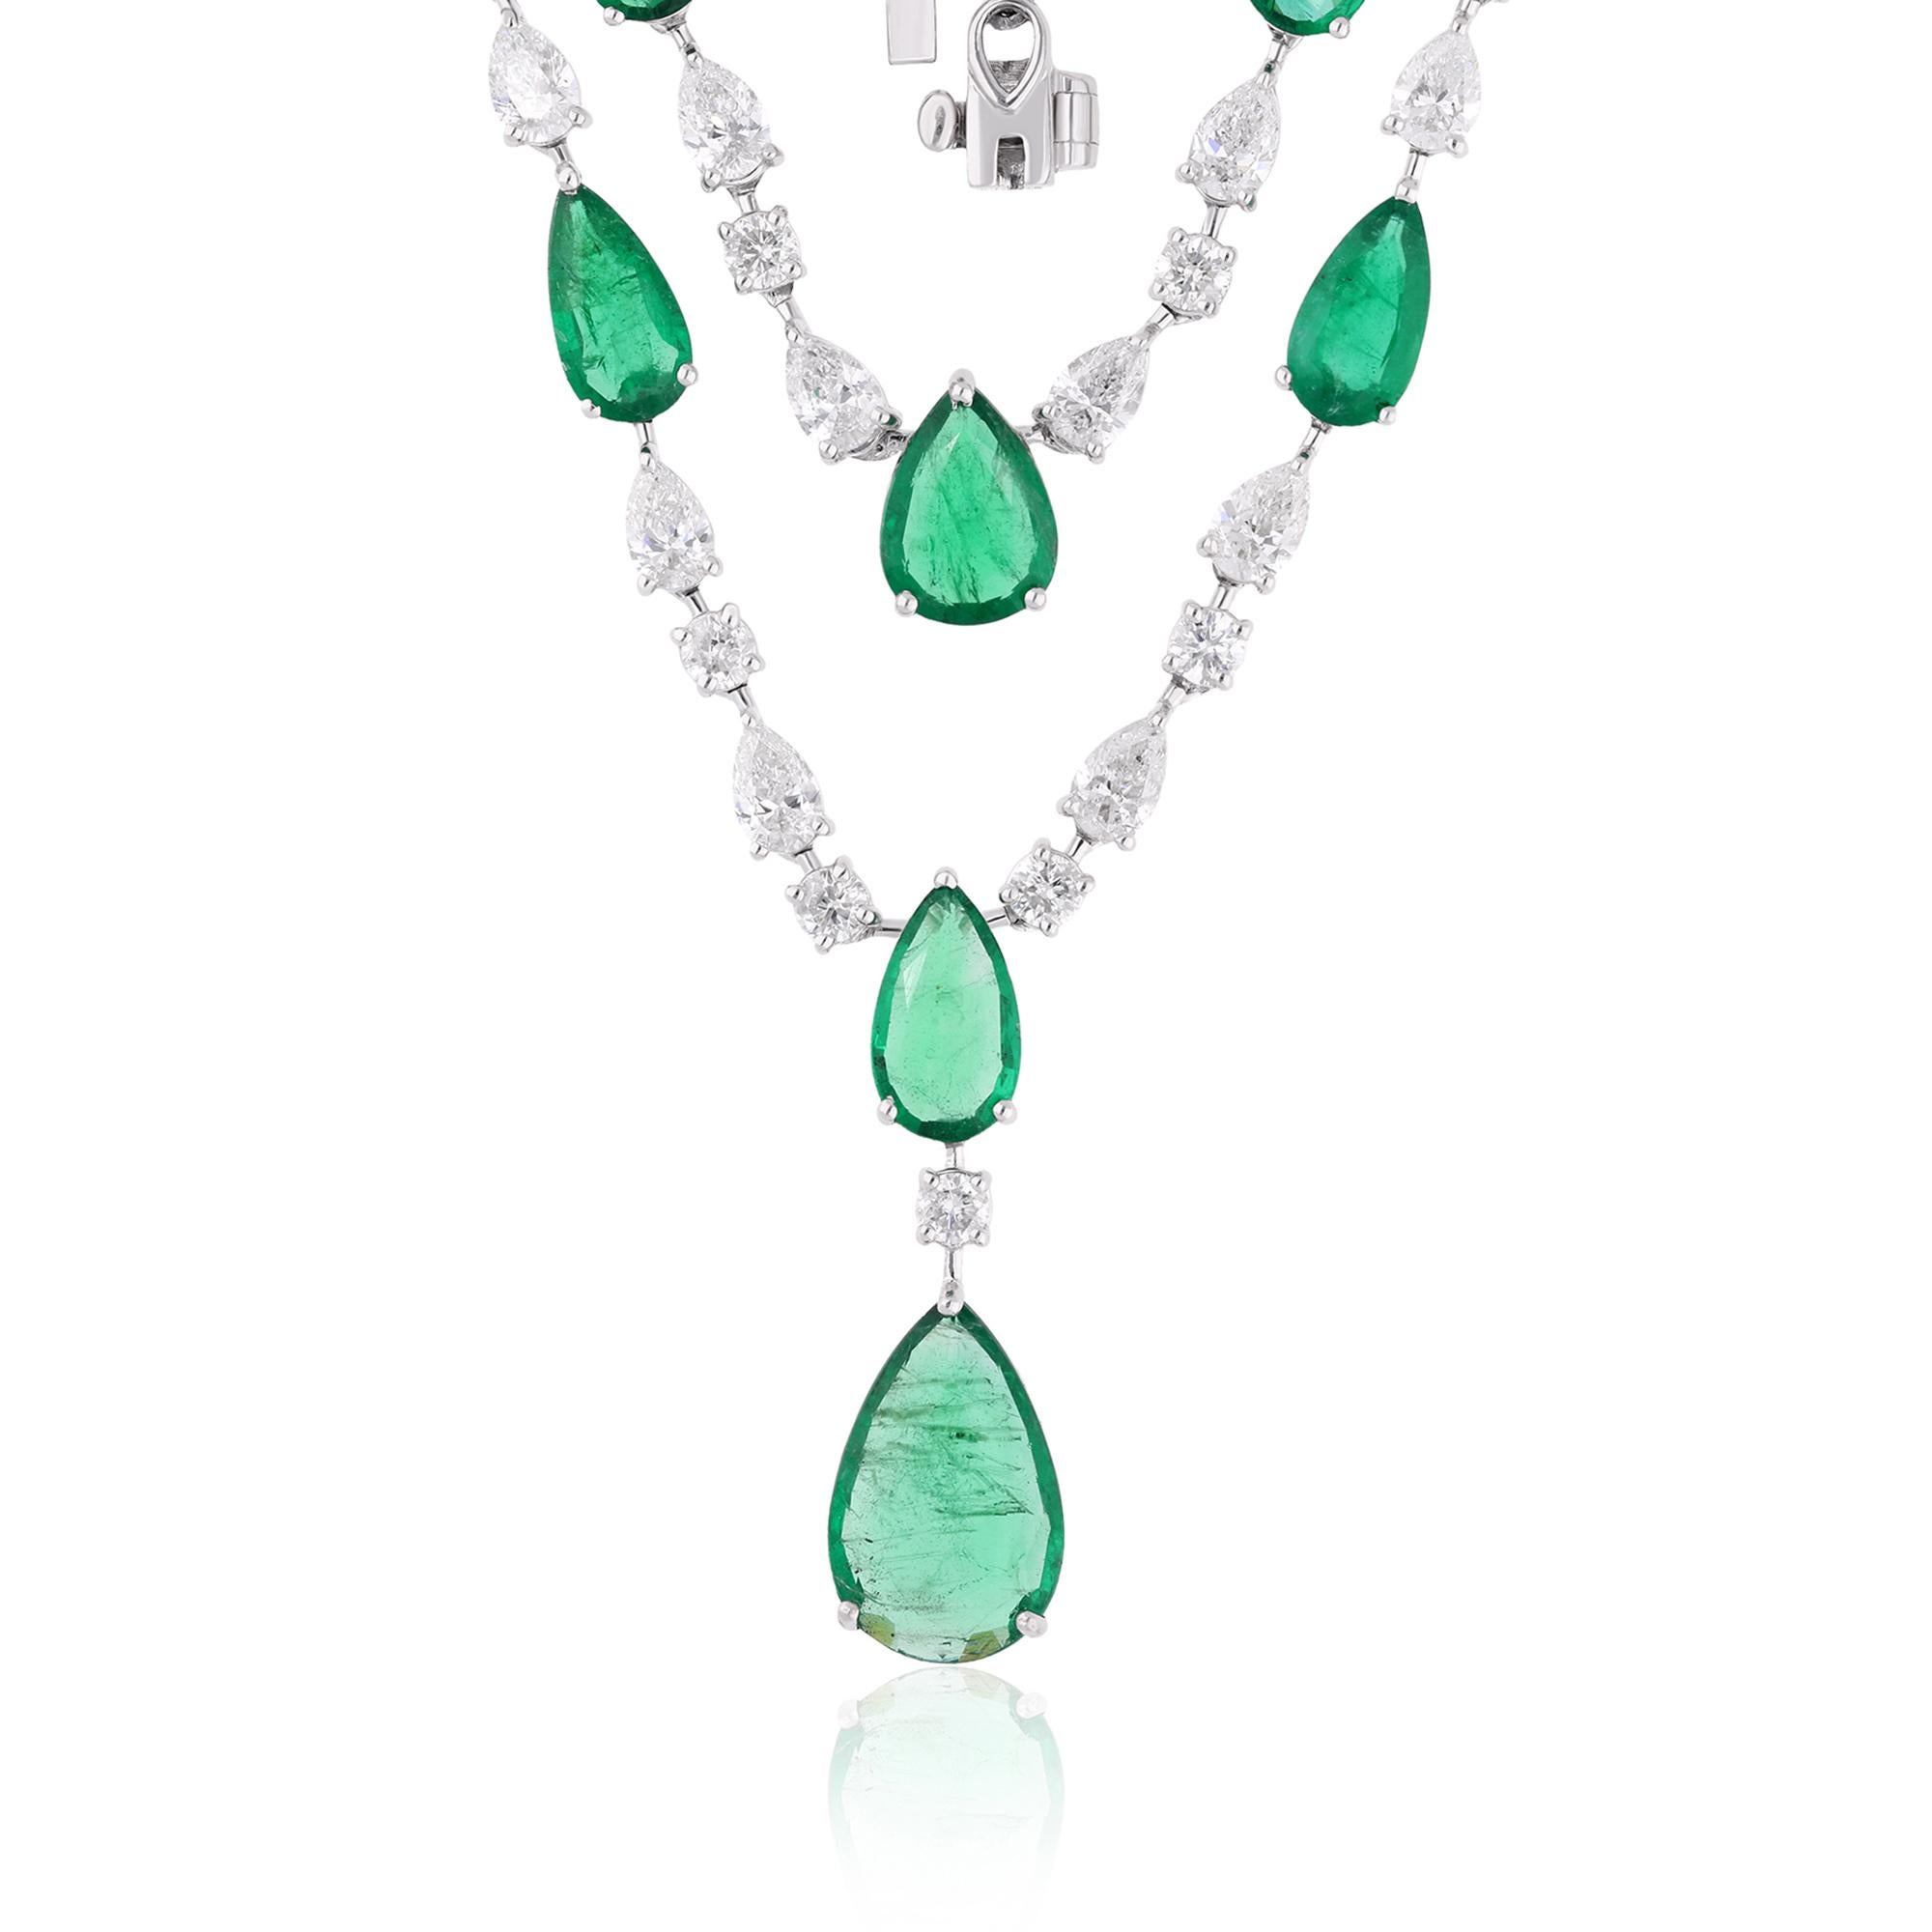 Experience the epitome of sophistication with this Real Zambian Emerald Gemstone Necklace, accented by radiant Diamonds and meticulously crafted in elegant 18 Karat White Gold. This exquisite piece of fine jewelry is a celebration of natural beauty